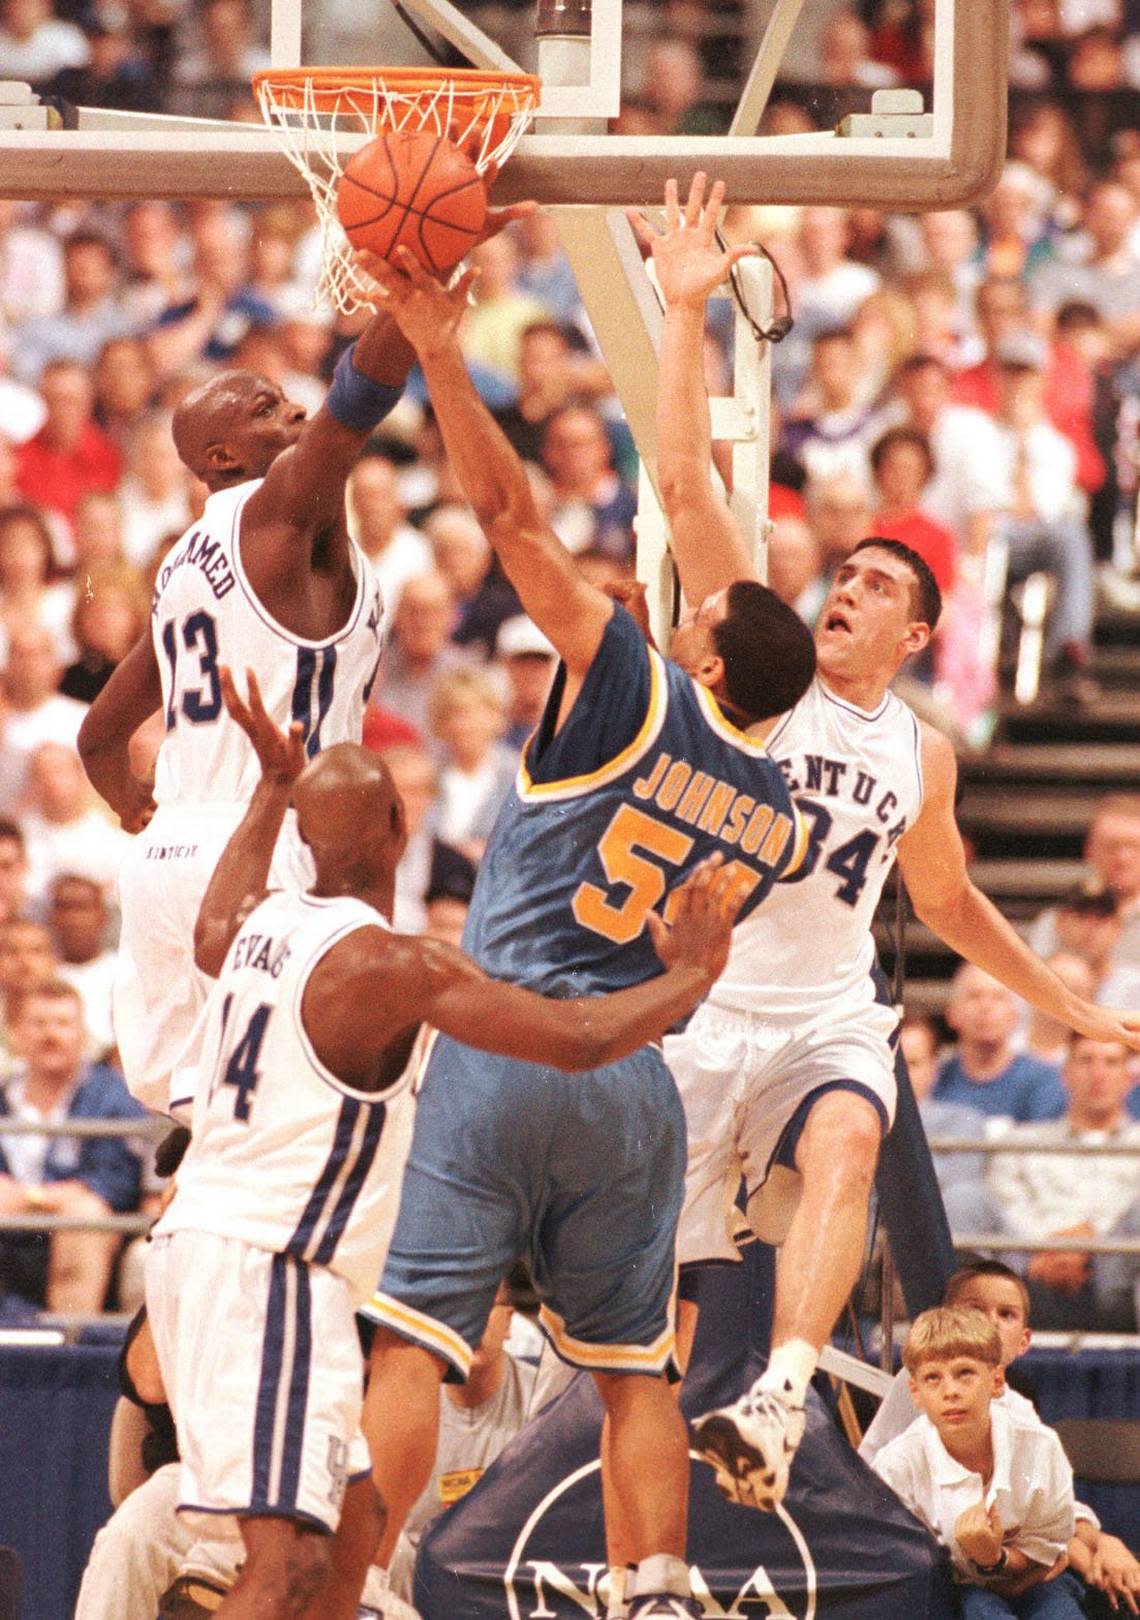 UK’s Nazr Mohammed blocks a shot by UCLA’s Kris Johnson, along with some help from Scott Padgett, right, and Heshimu Evans during the 1998 NCAA Tournament in St. Petersburg, Fla. Mohammed blocked six shots in the game.